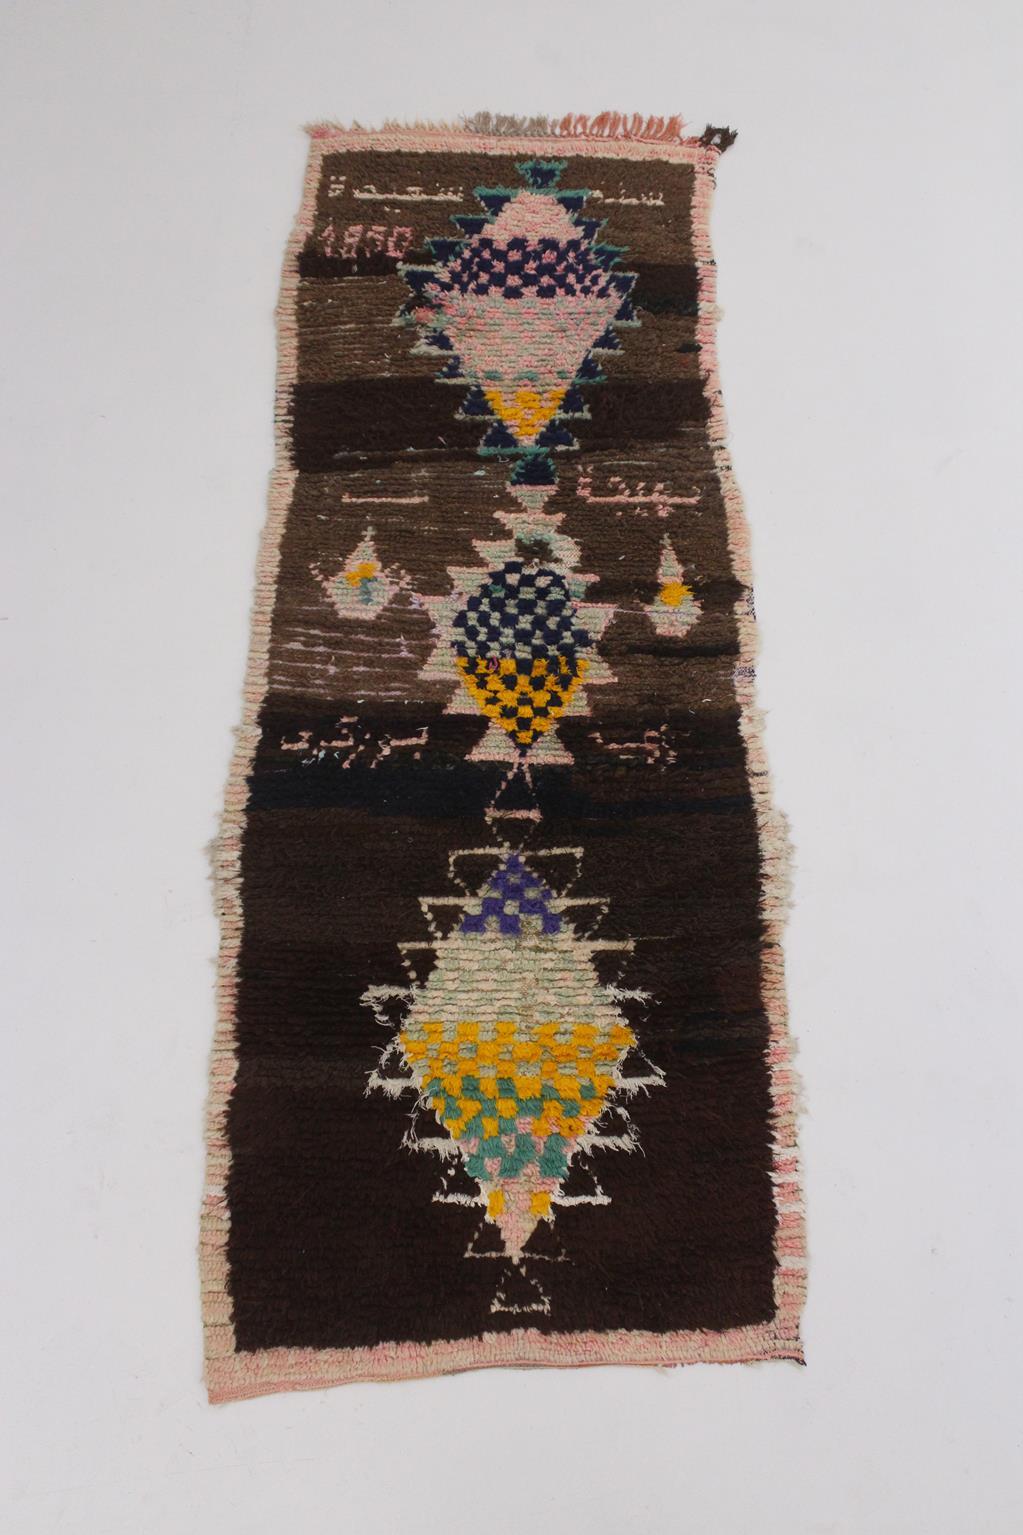 This beautiful vintage runner rug has been sourced in the area of Azilal, High Atlas, Morocco. 

If you look at it closely, you will spot two colorful teapots and names written into it, amongst usual berber designs like diamonds and checks. The name